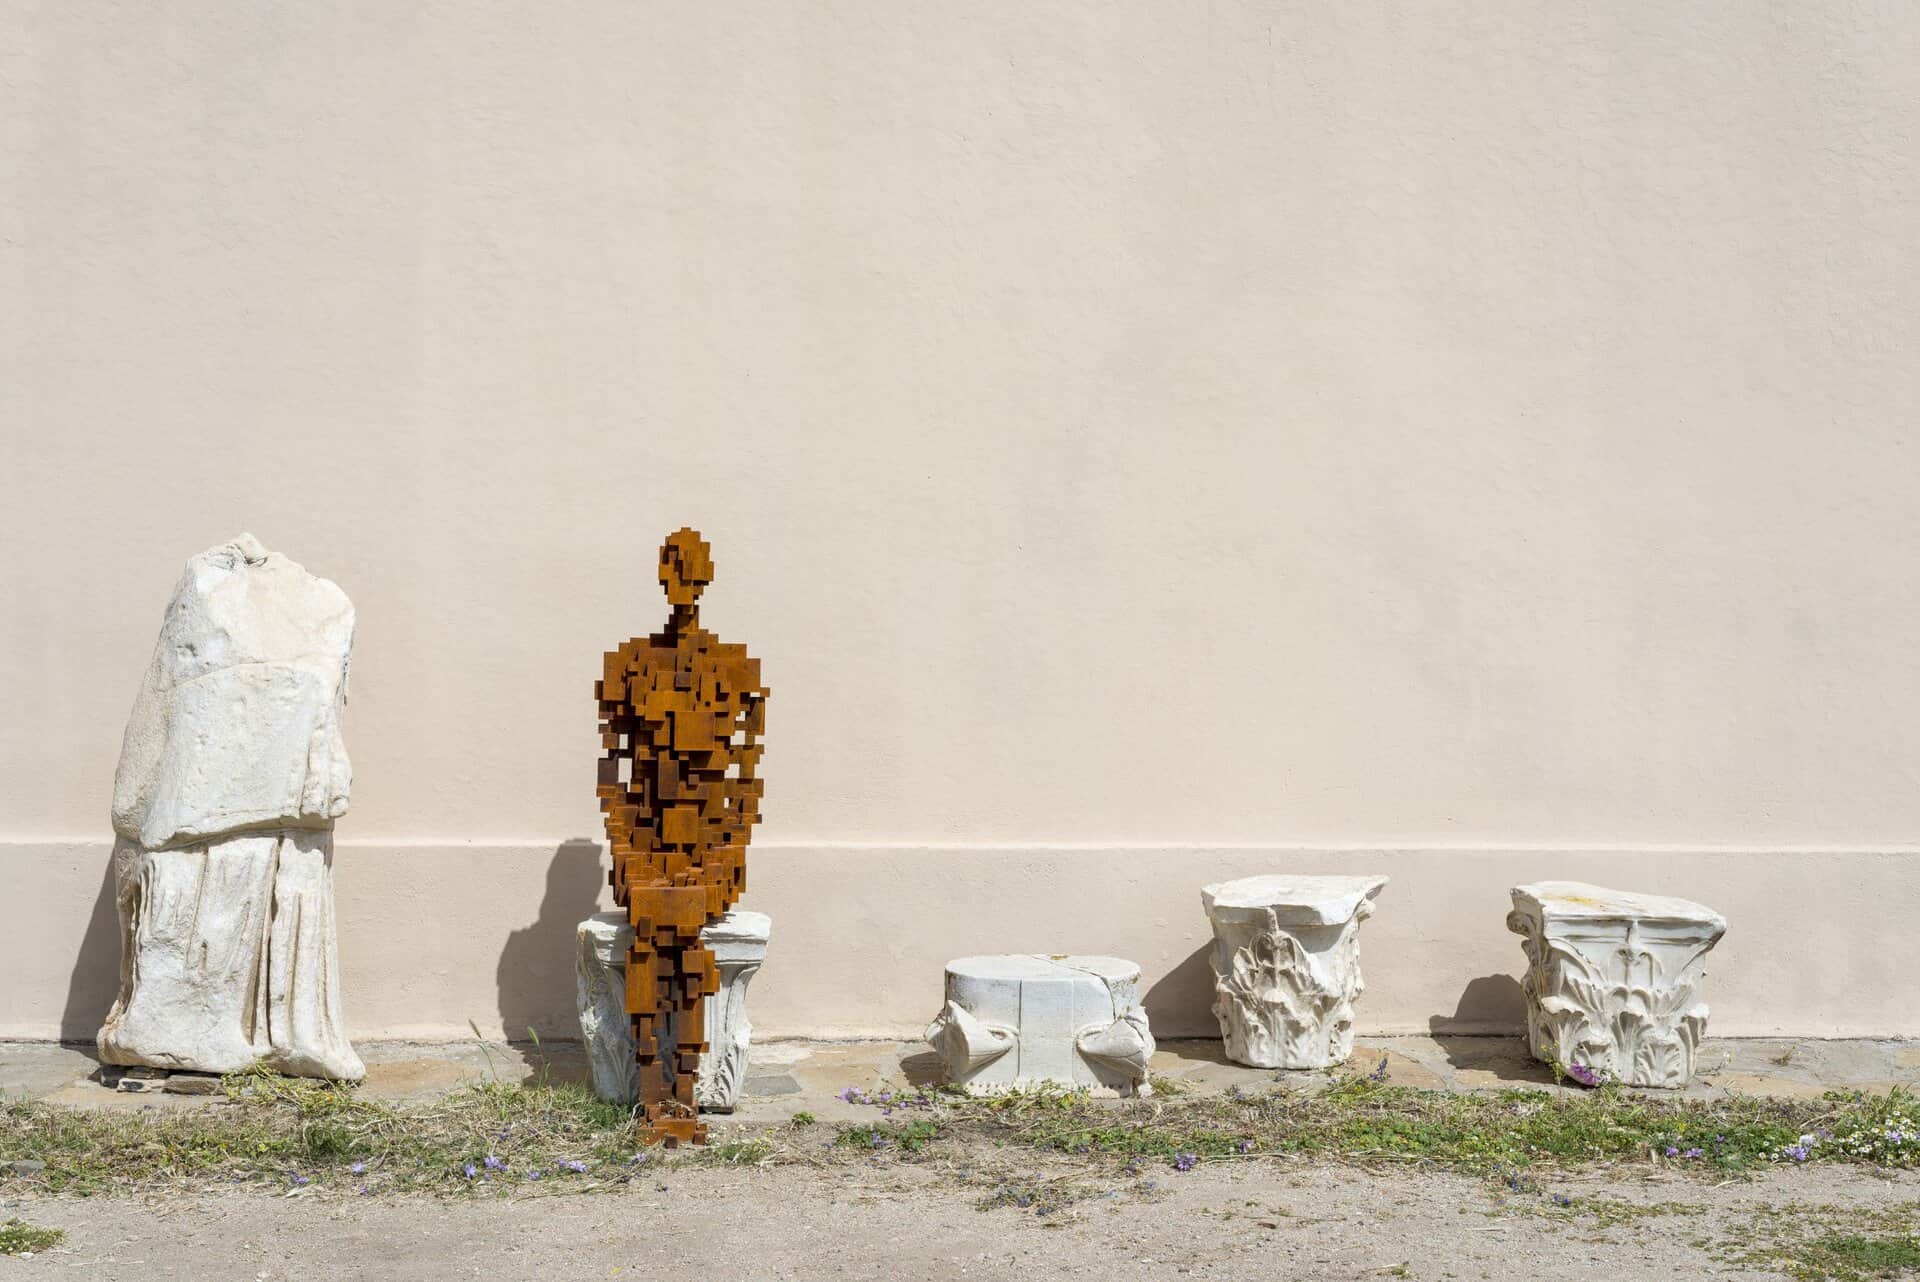 Antony Gormley
RULE, 2018
Cast iron
149 x 45.5 x 75 cm
Installation view, Delos, Greece
Photograph by Oak Taylor Smith
Courtesy NEON Foundation; Ephorate of Antiquities of Cyclades
© the artist